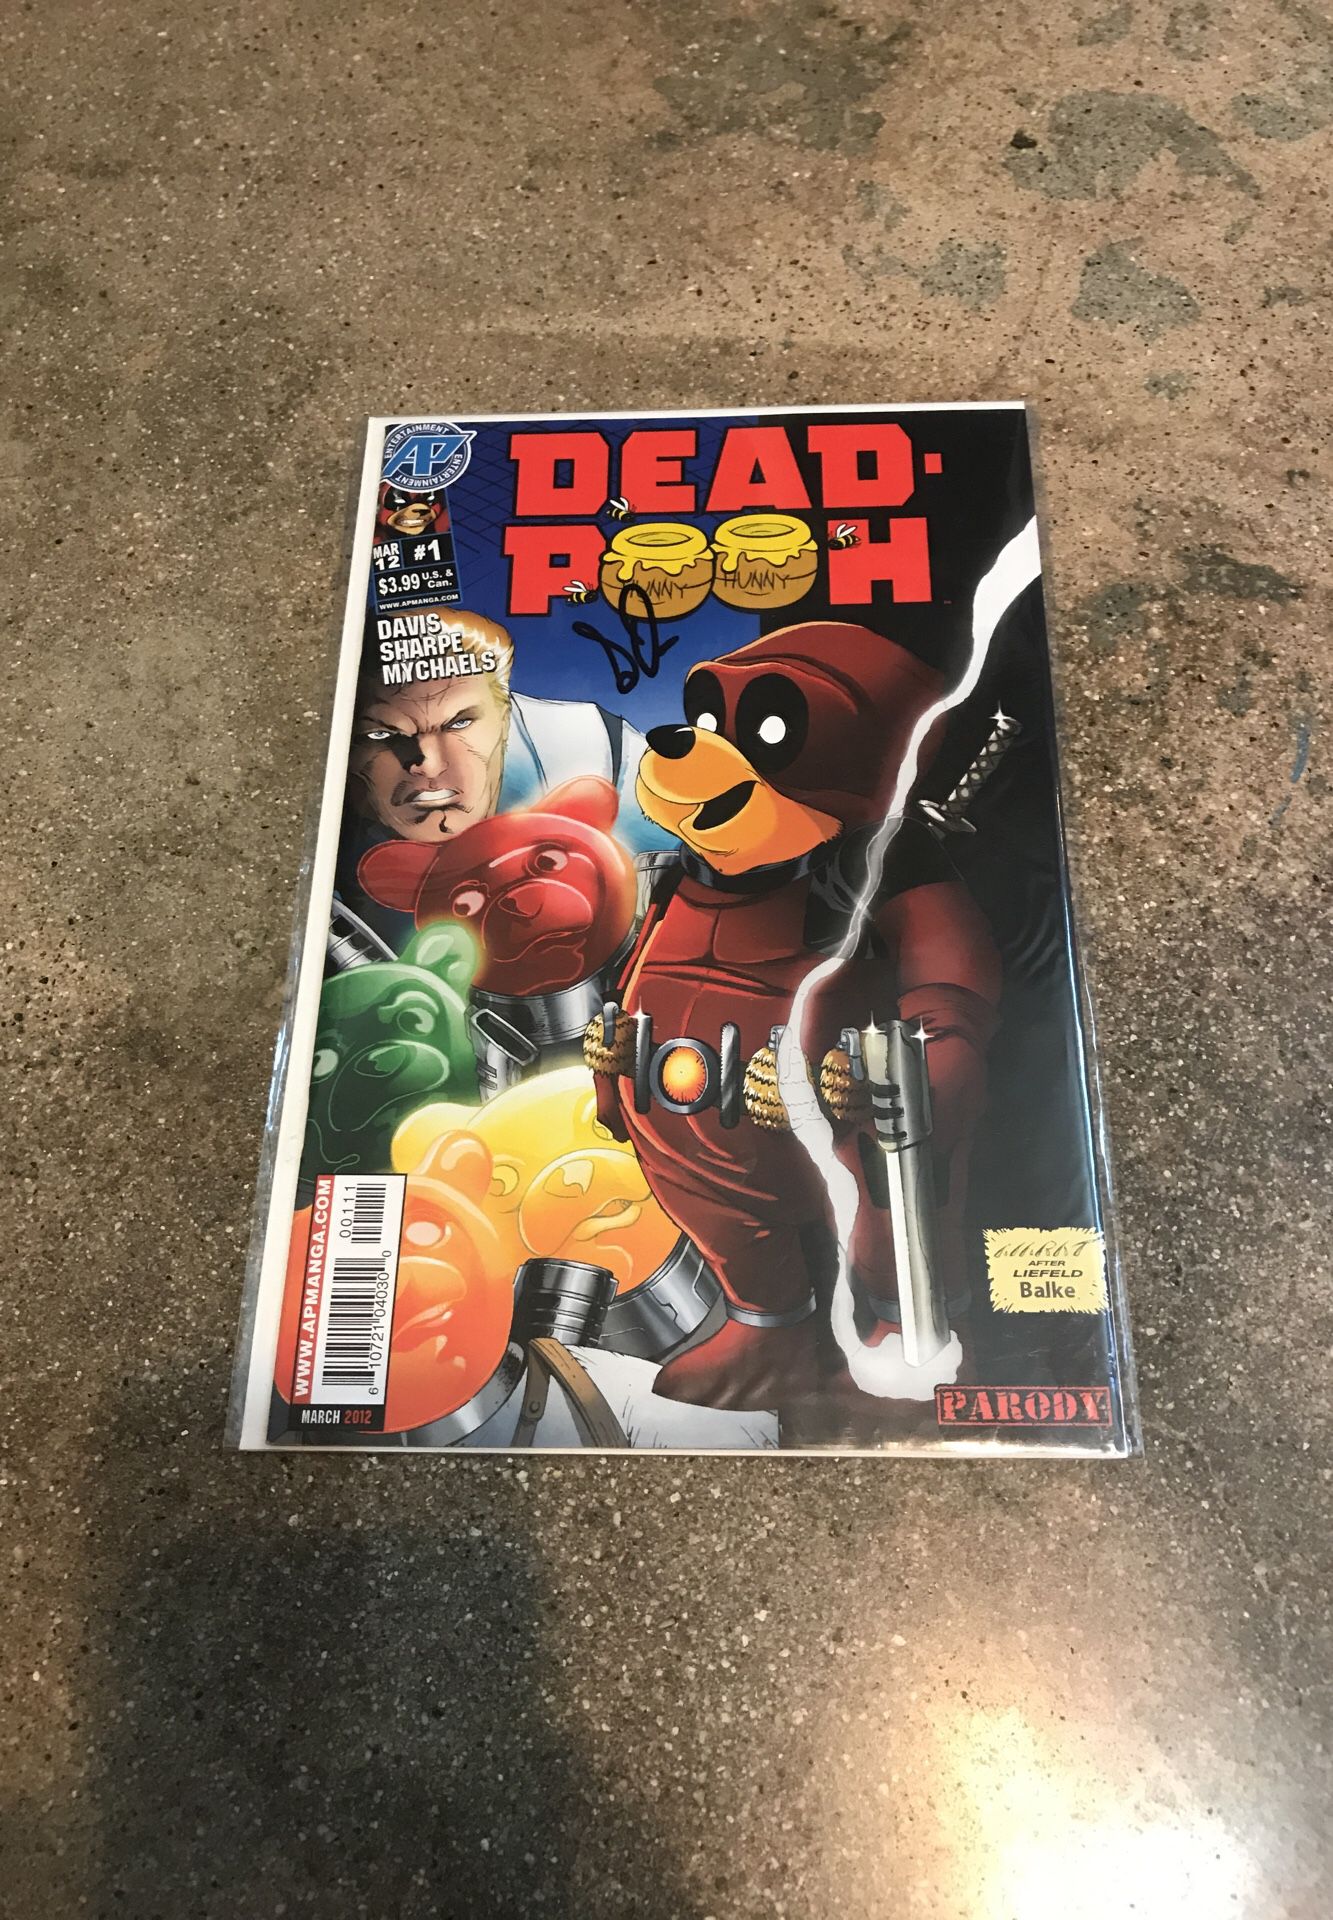 VERY RARE DEADPOOH 1 COMIC BOOK SIGNED MINT CONDITION 10/10